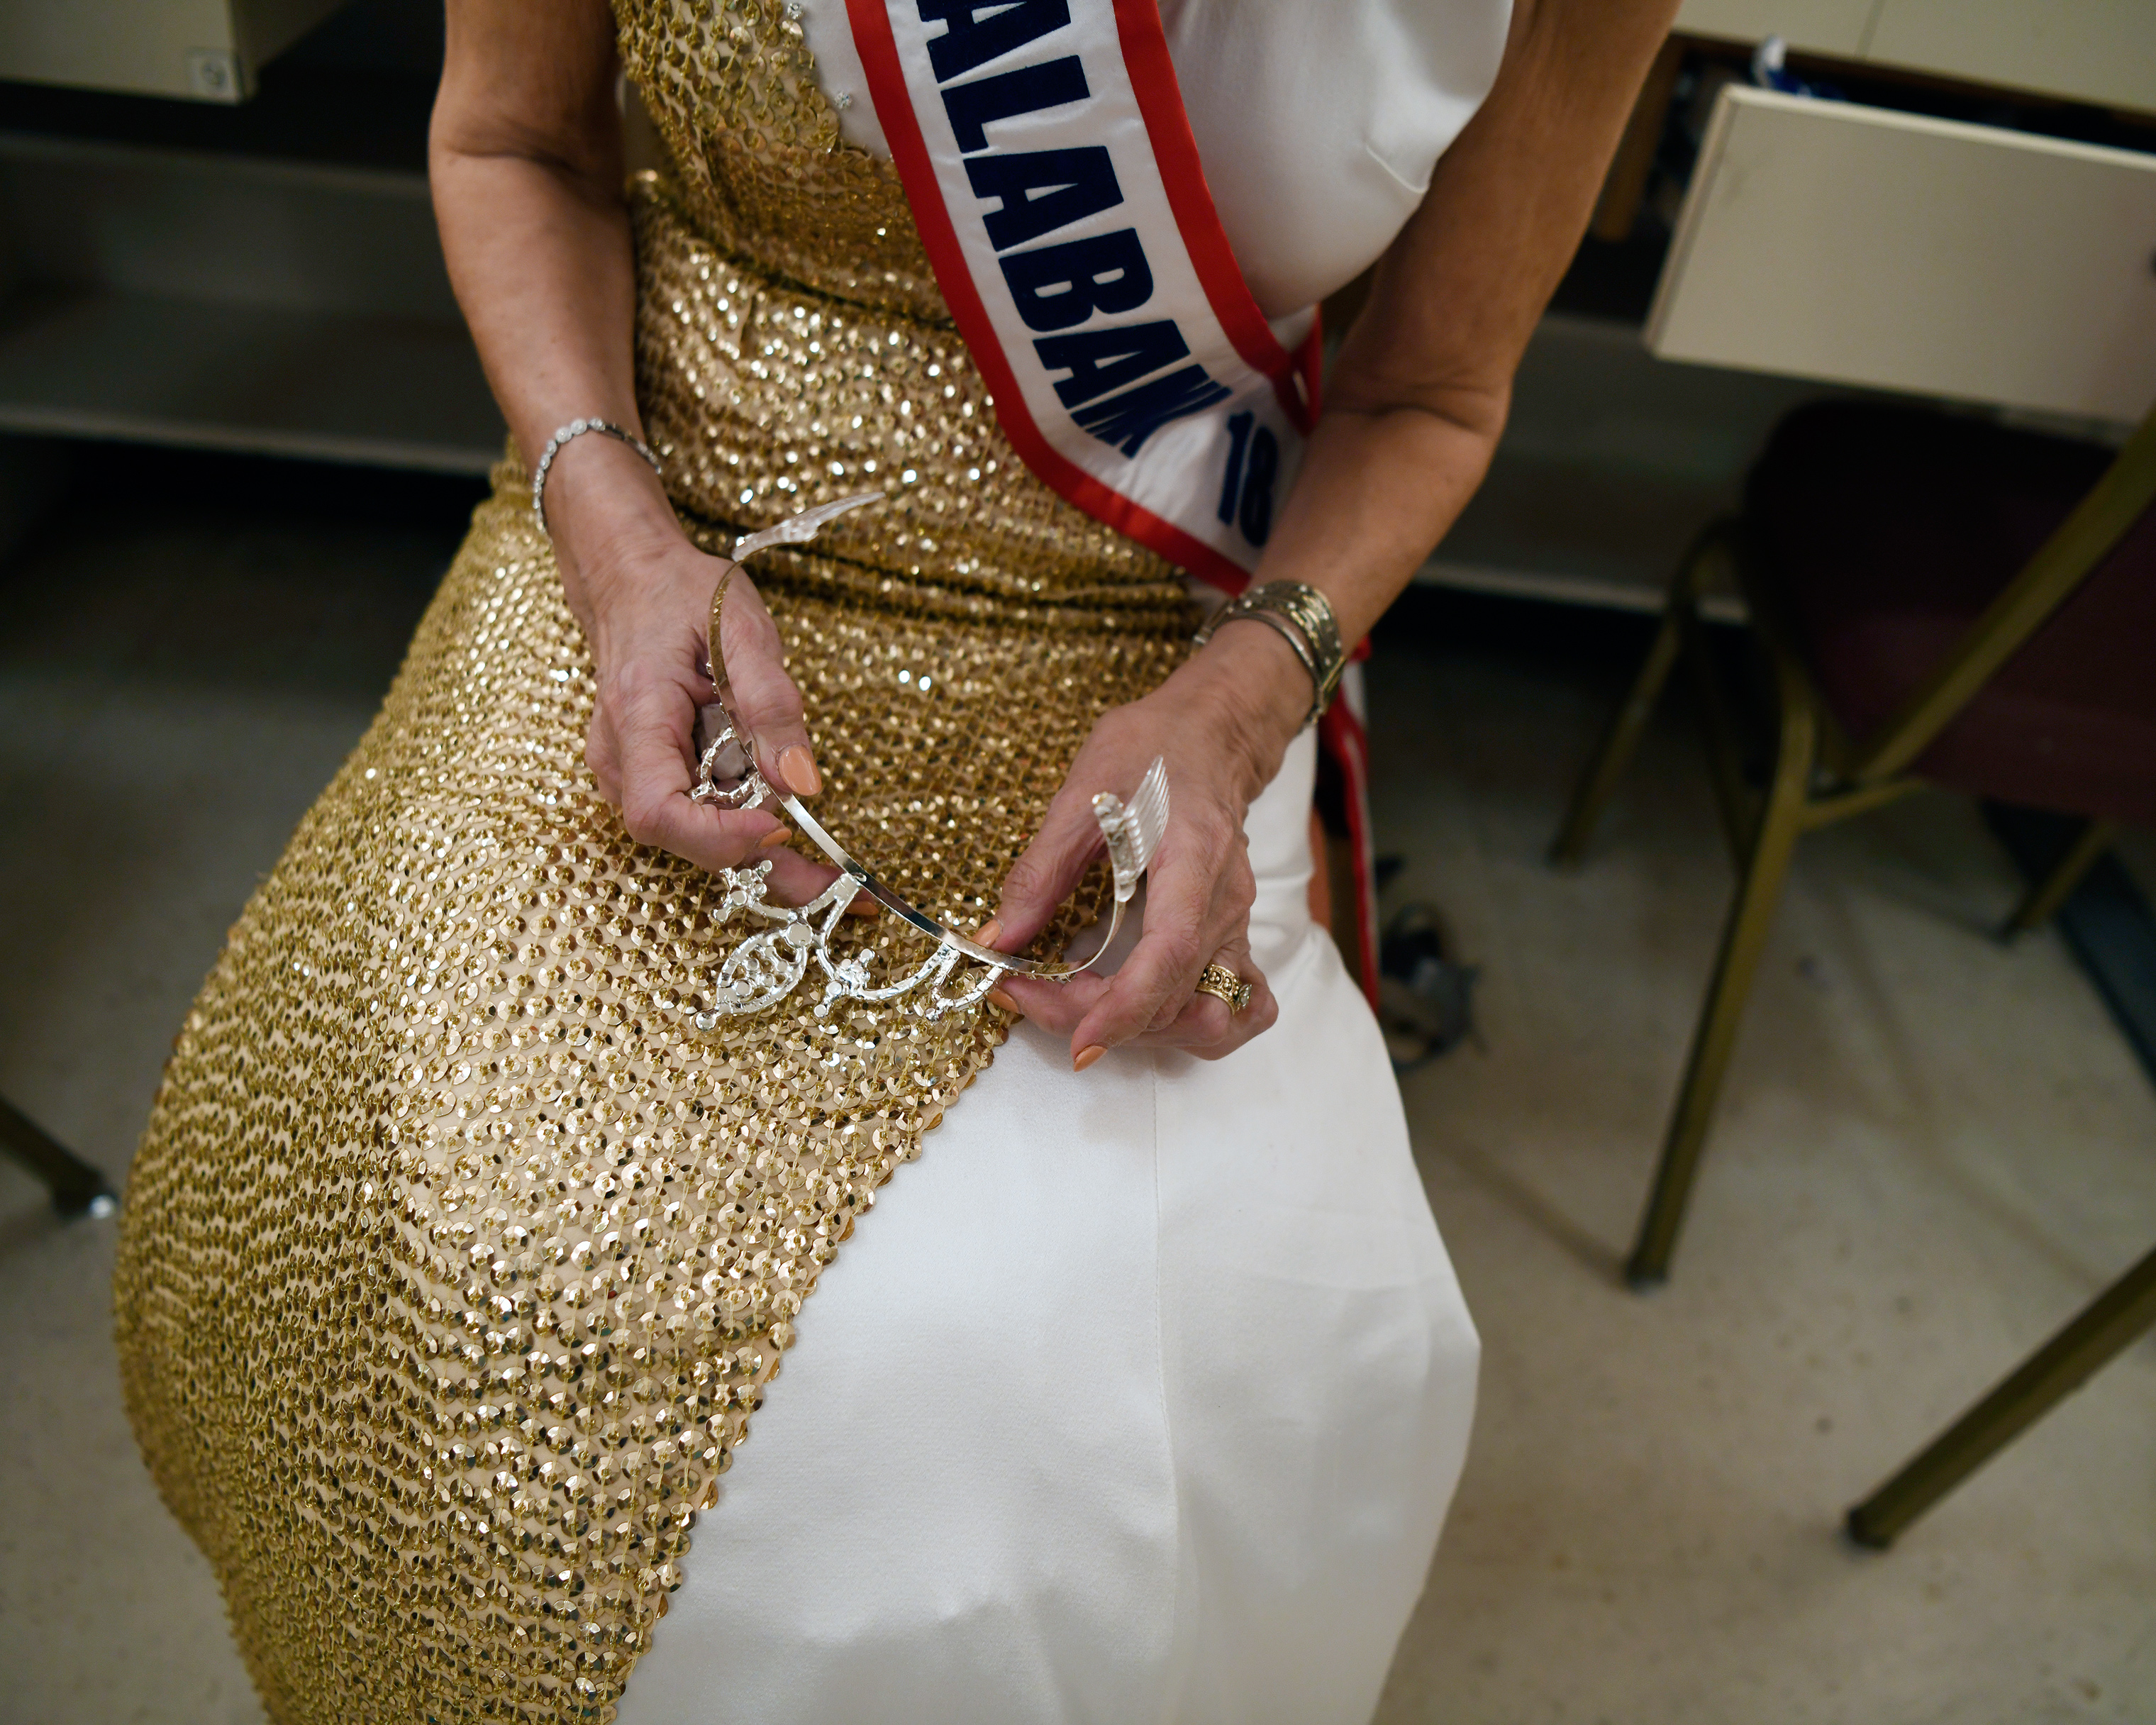 Georgia Lee, Ms. Alabama, holds her crown in the dressing room between pageant acts. (Rosa Polin for TIME)